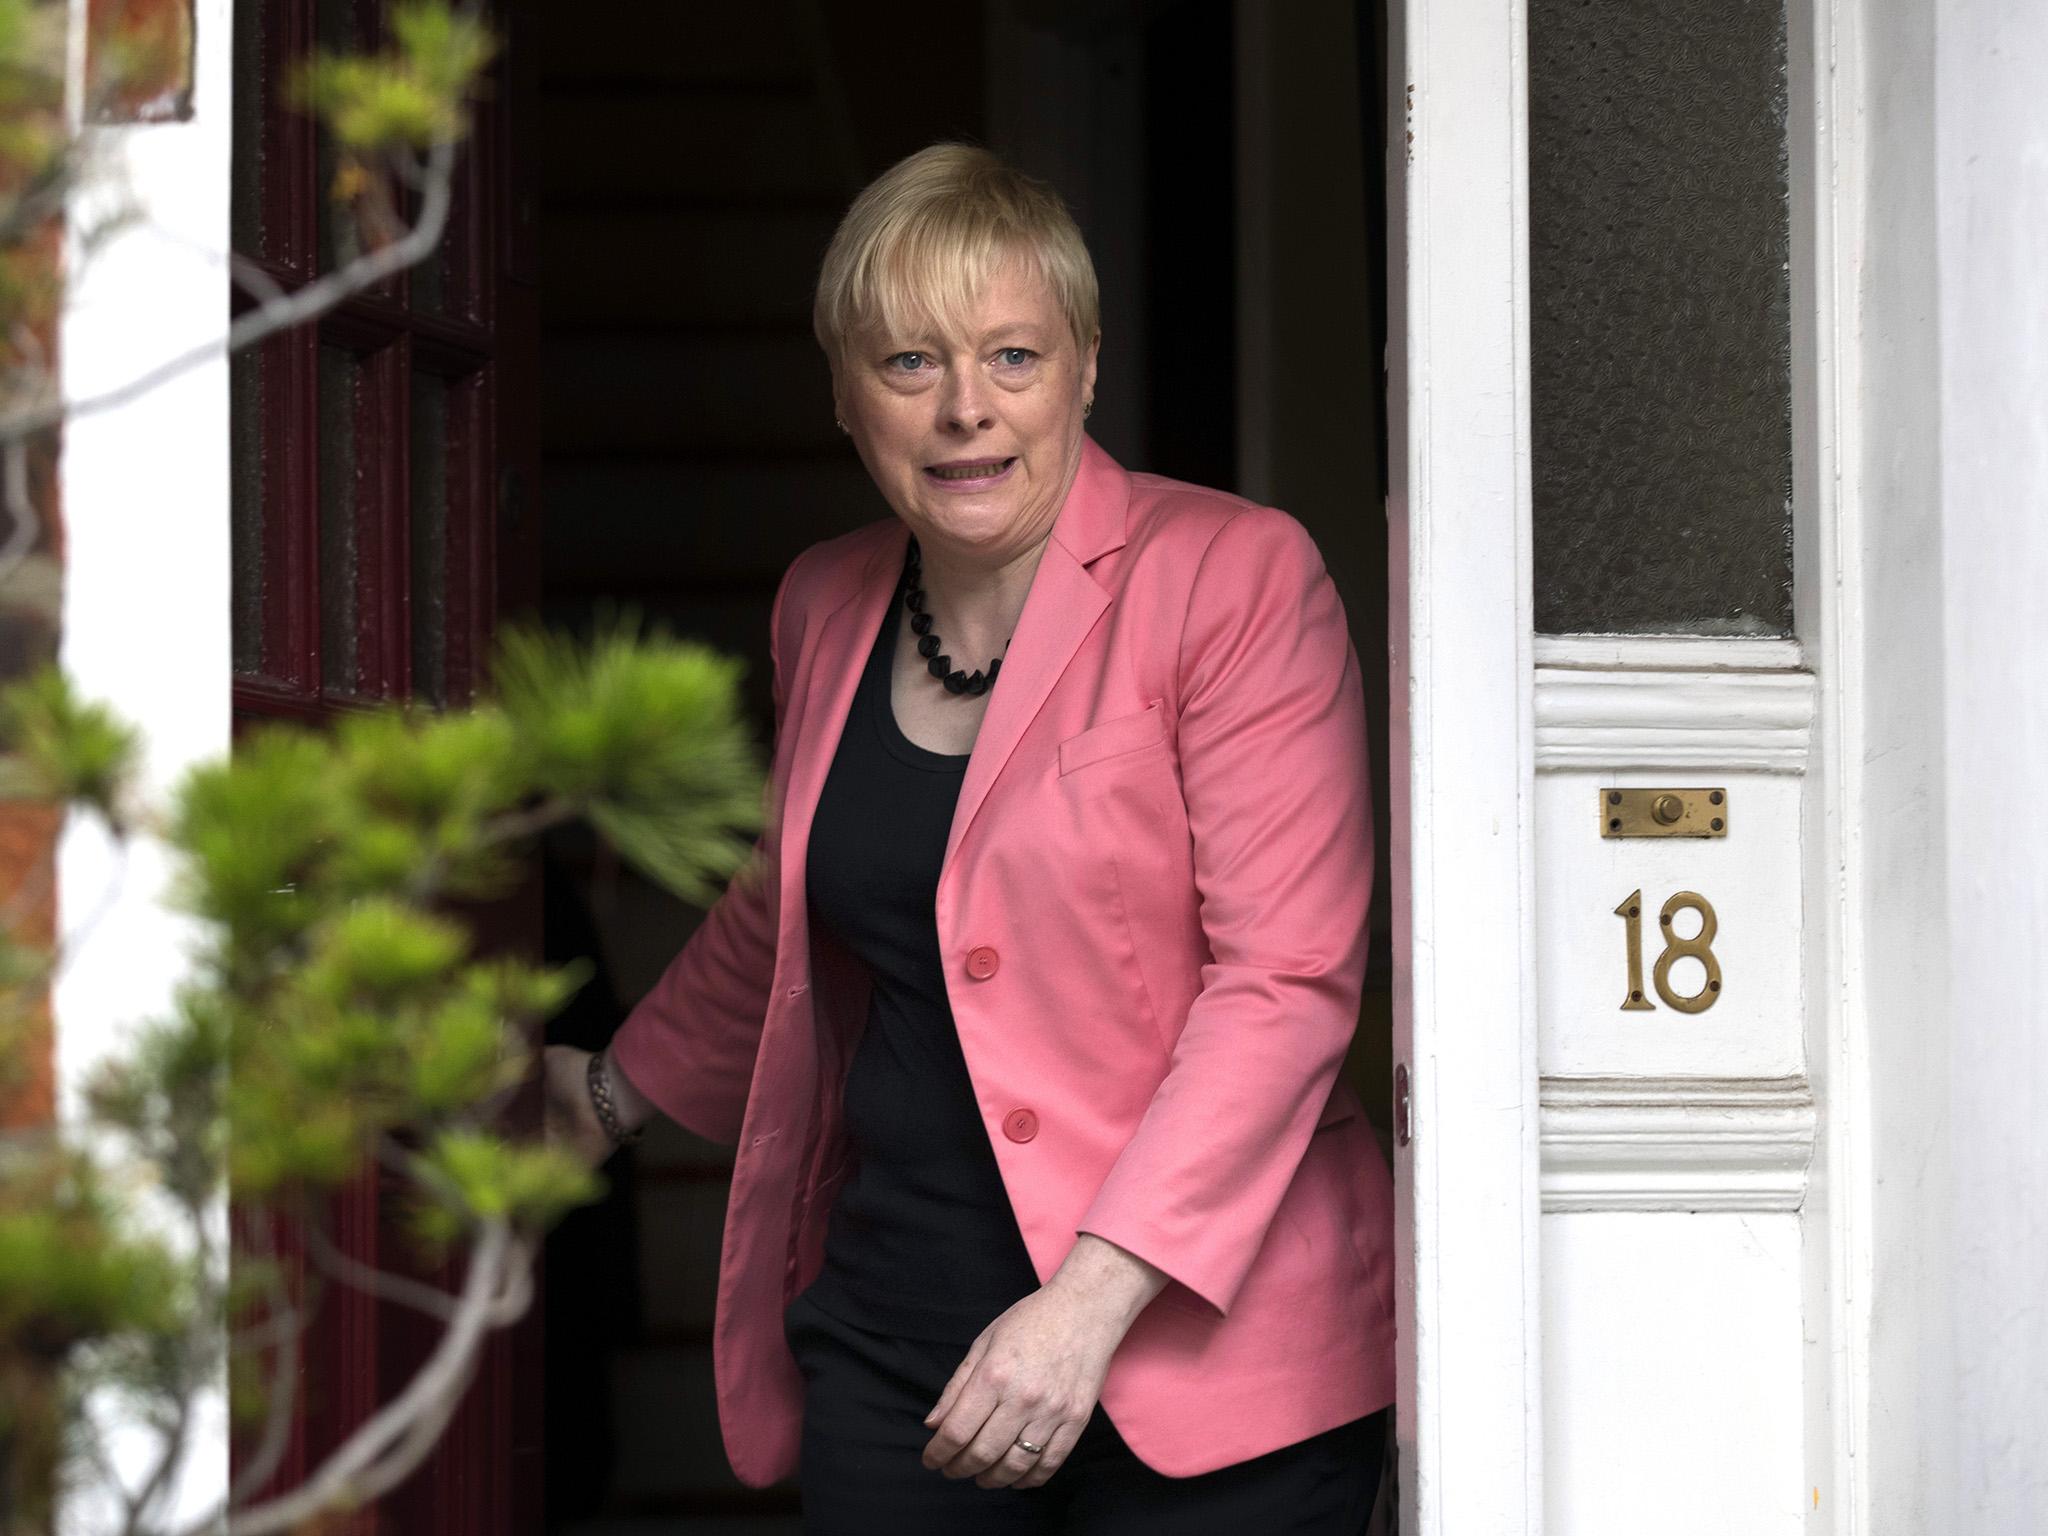 The report said it was ‘highly likely’ that a brick thrown through the window of Angela Eagle’s office was related to her leadership challenge